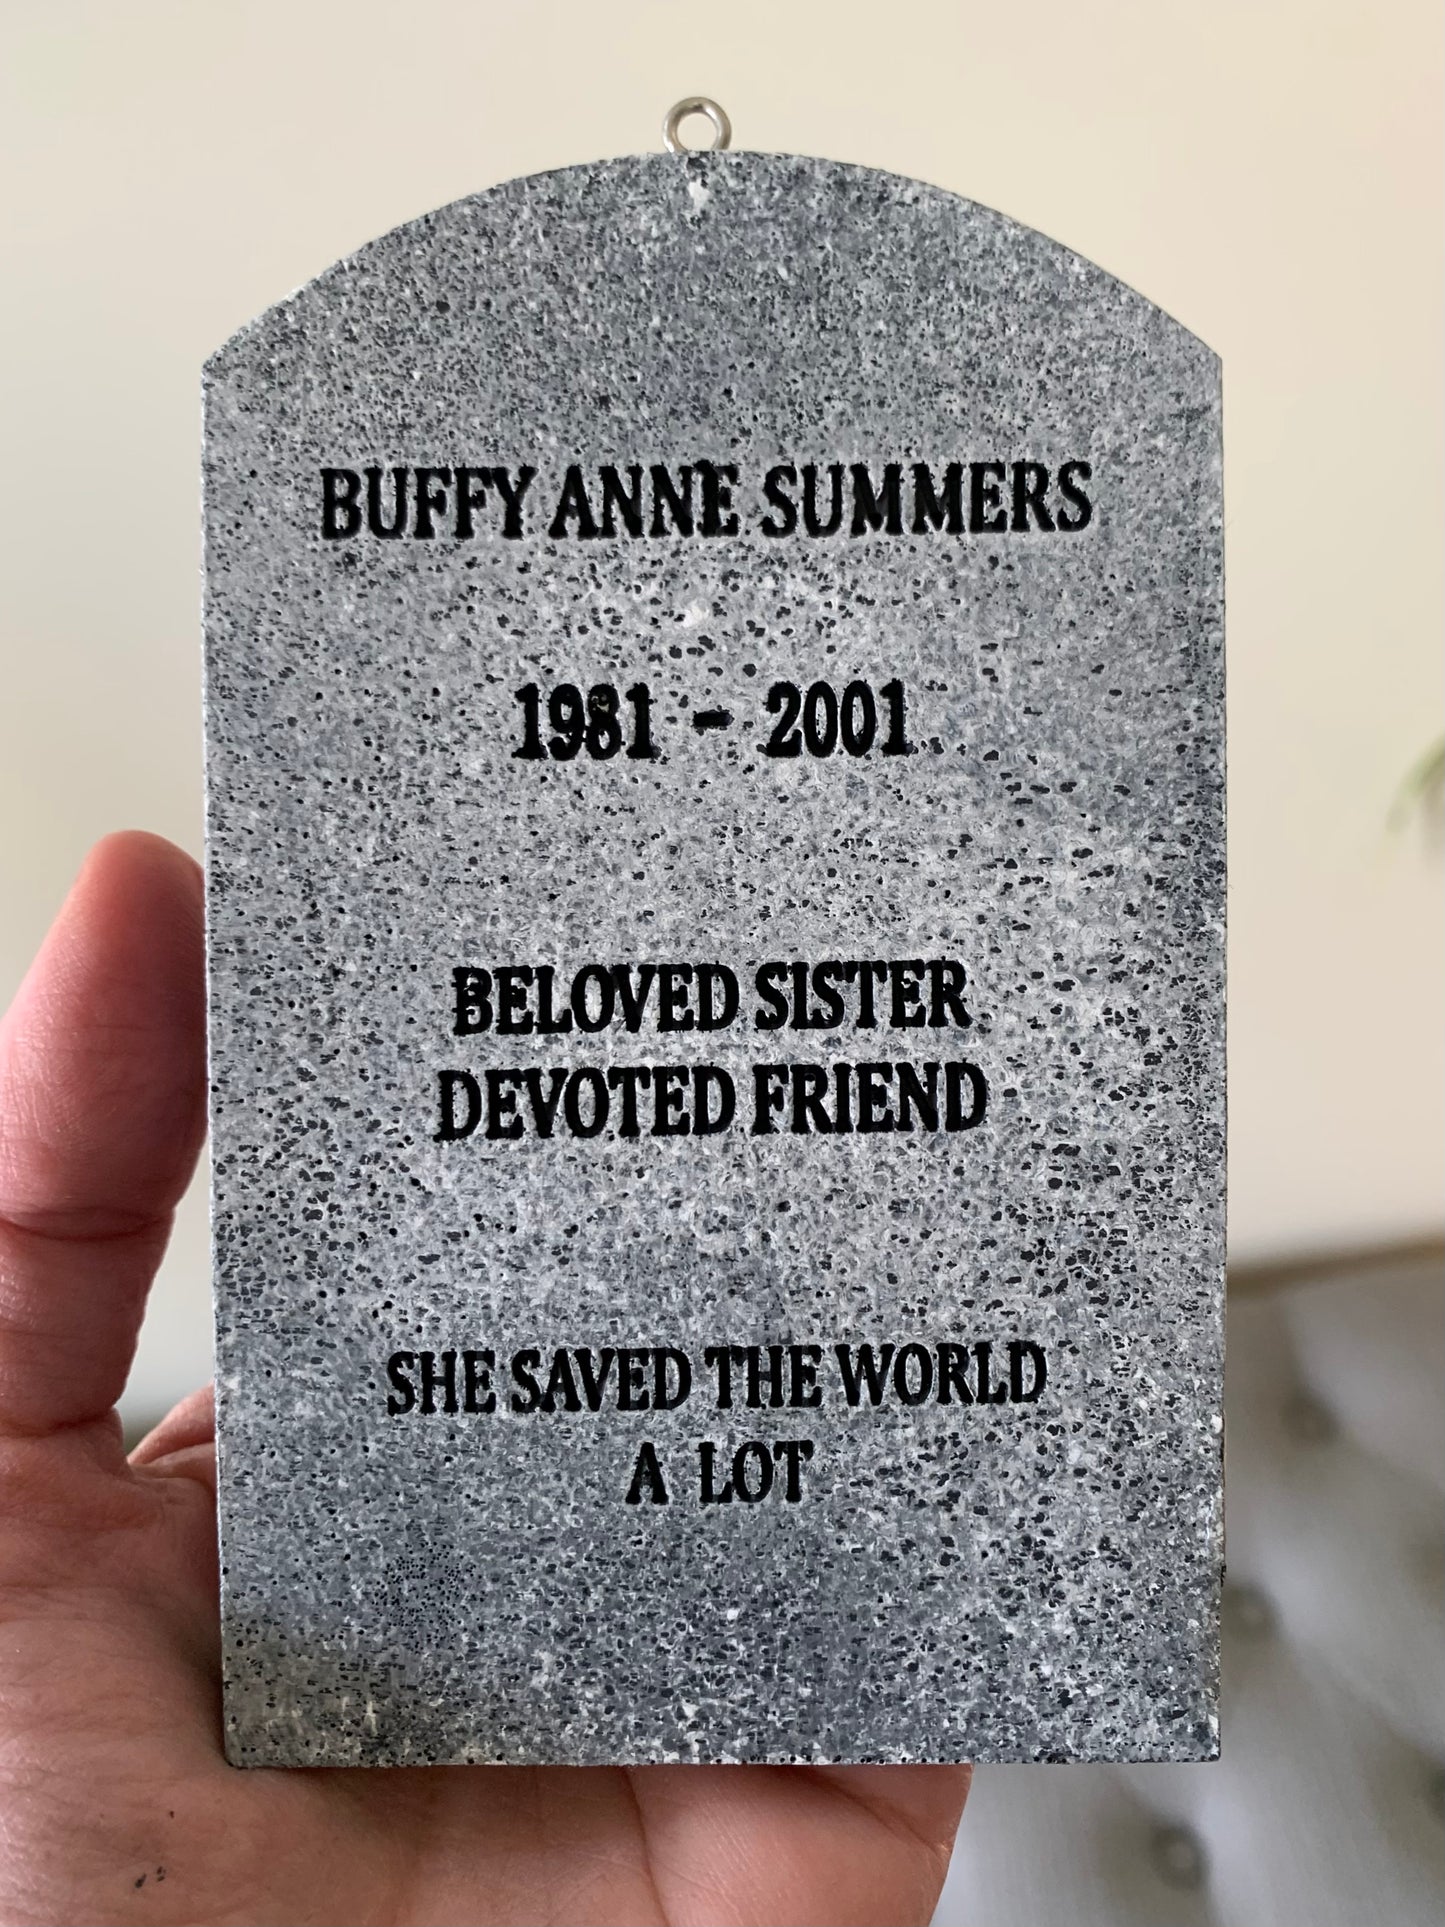 Buffy Summers "The Vampire Slayer" Tombstone Ornament